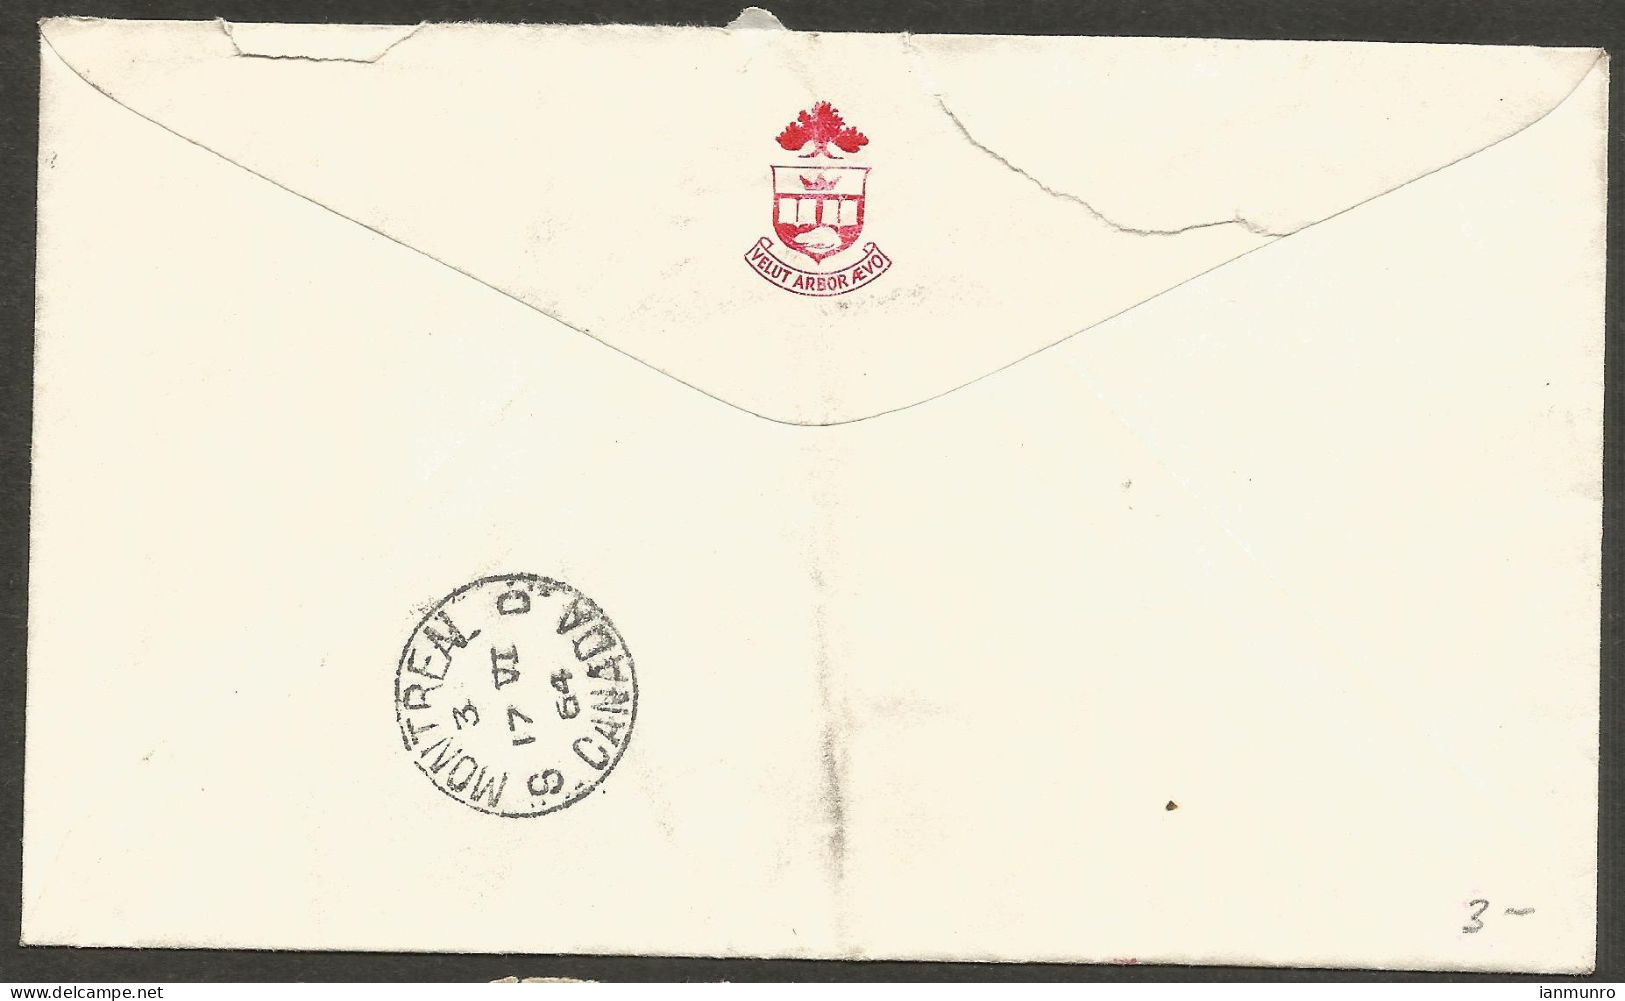 1964 Special Delivery Cover 30c Chemical CDS Toronto Terminal A Ontario To Montreal PQ Quebec - Histoire Postale